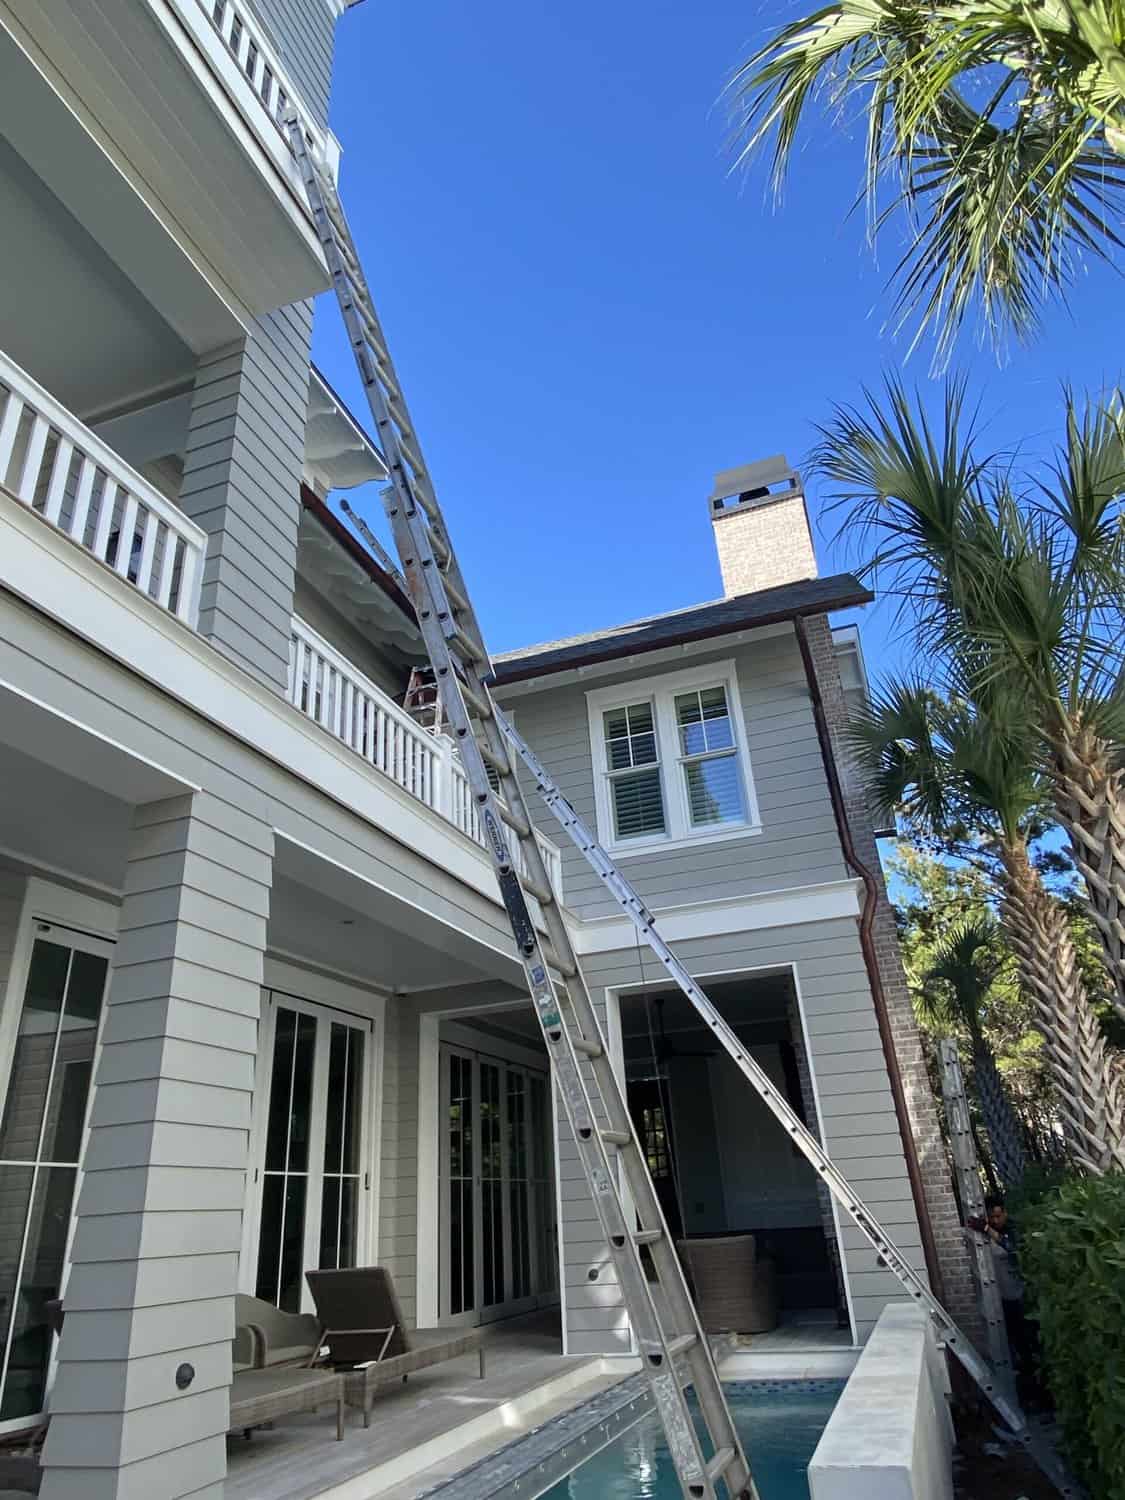 A ladder rests against a 2 story, residential home. Mid painting project